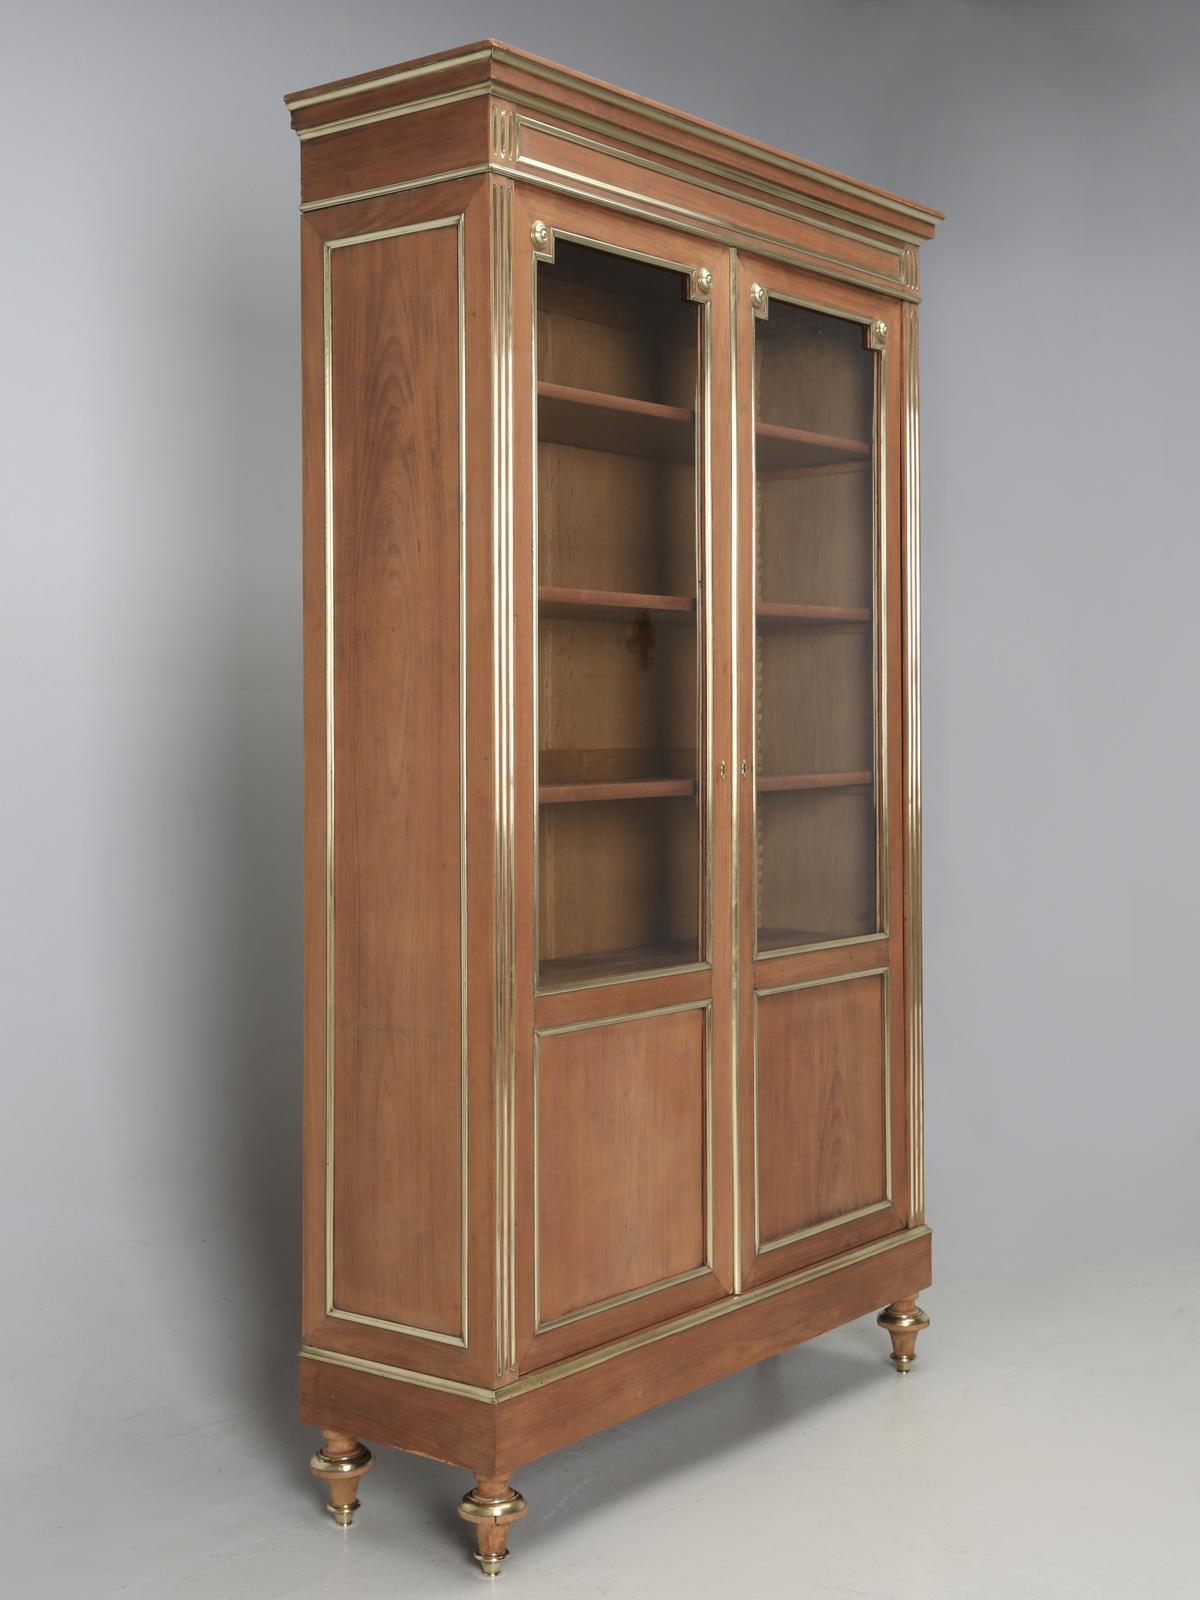 Antique French Louis XVI bookcase (bibliotheque), or china cabinet, probably made from solid mahogany. All of the decorations are constructed of real brass and are not merely painted gold. The mahogany cabinet itself, has been carefully hand-sanded